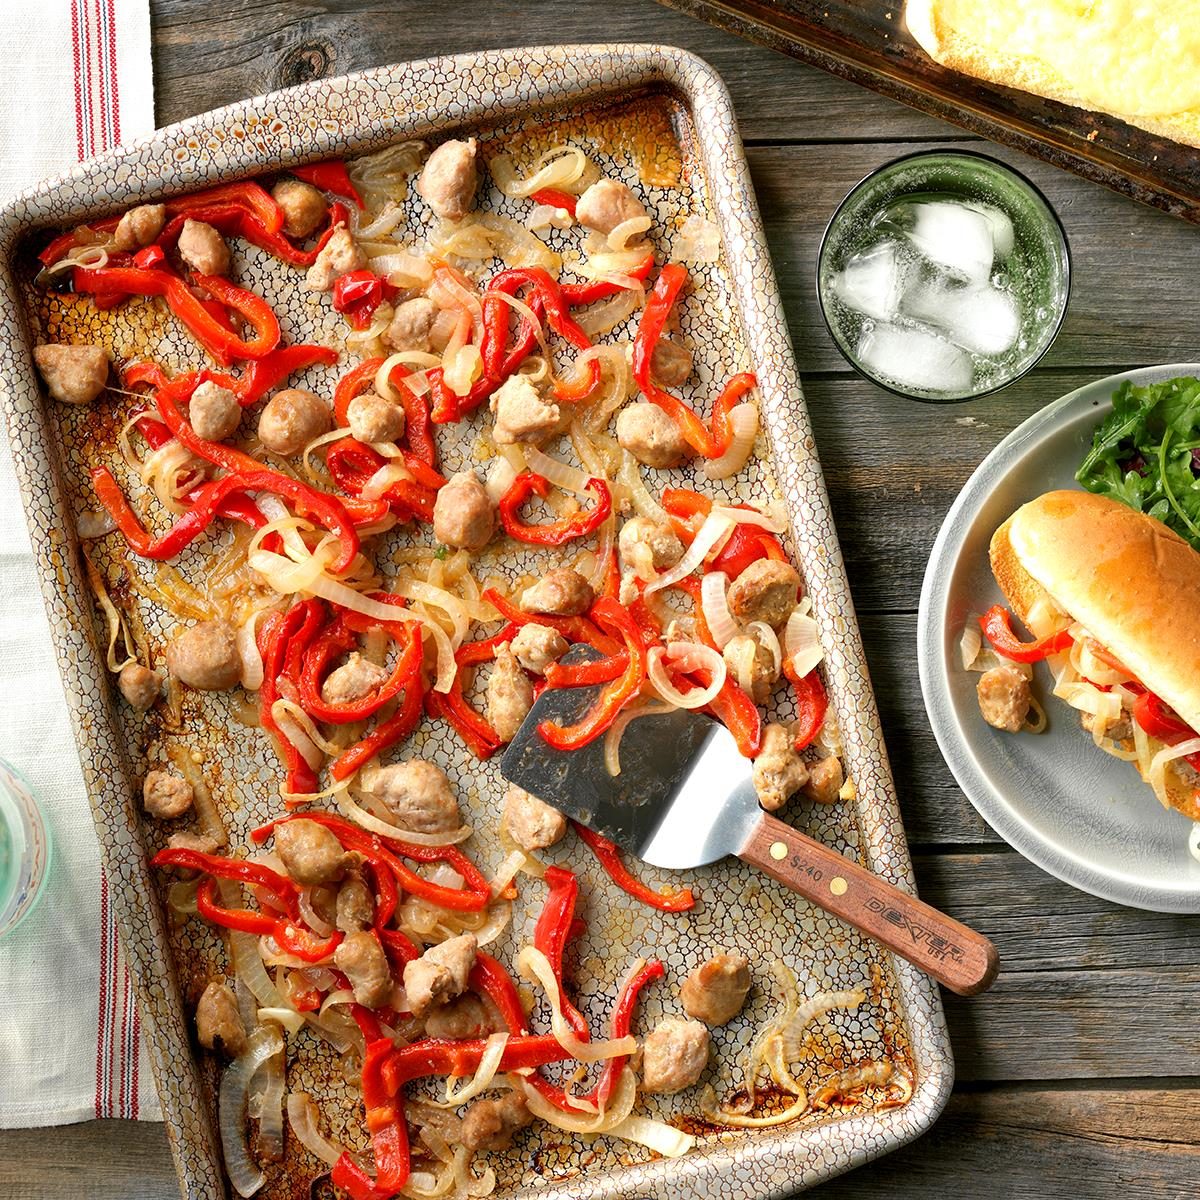 <p>Sausage with peppers was always on the table when I was growing up. Here's how to do it the easy way: Just grab a sheet pan and the ingredients, then let the oven do the work. —Debbie Glasscock, Conway, Arkansas</p> <div class="listicle-page__buttons"> <div class="listicle-page__cta-button"><a href='https://www.tasteofhome.com/recipes/sausage-and-pepper-sheet-pan-sandwiches/'>Go to Recipe</a></div> </div>